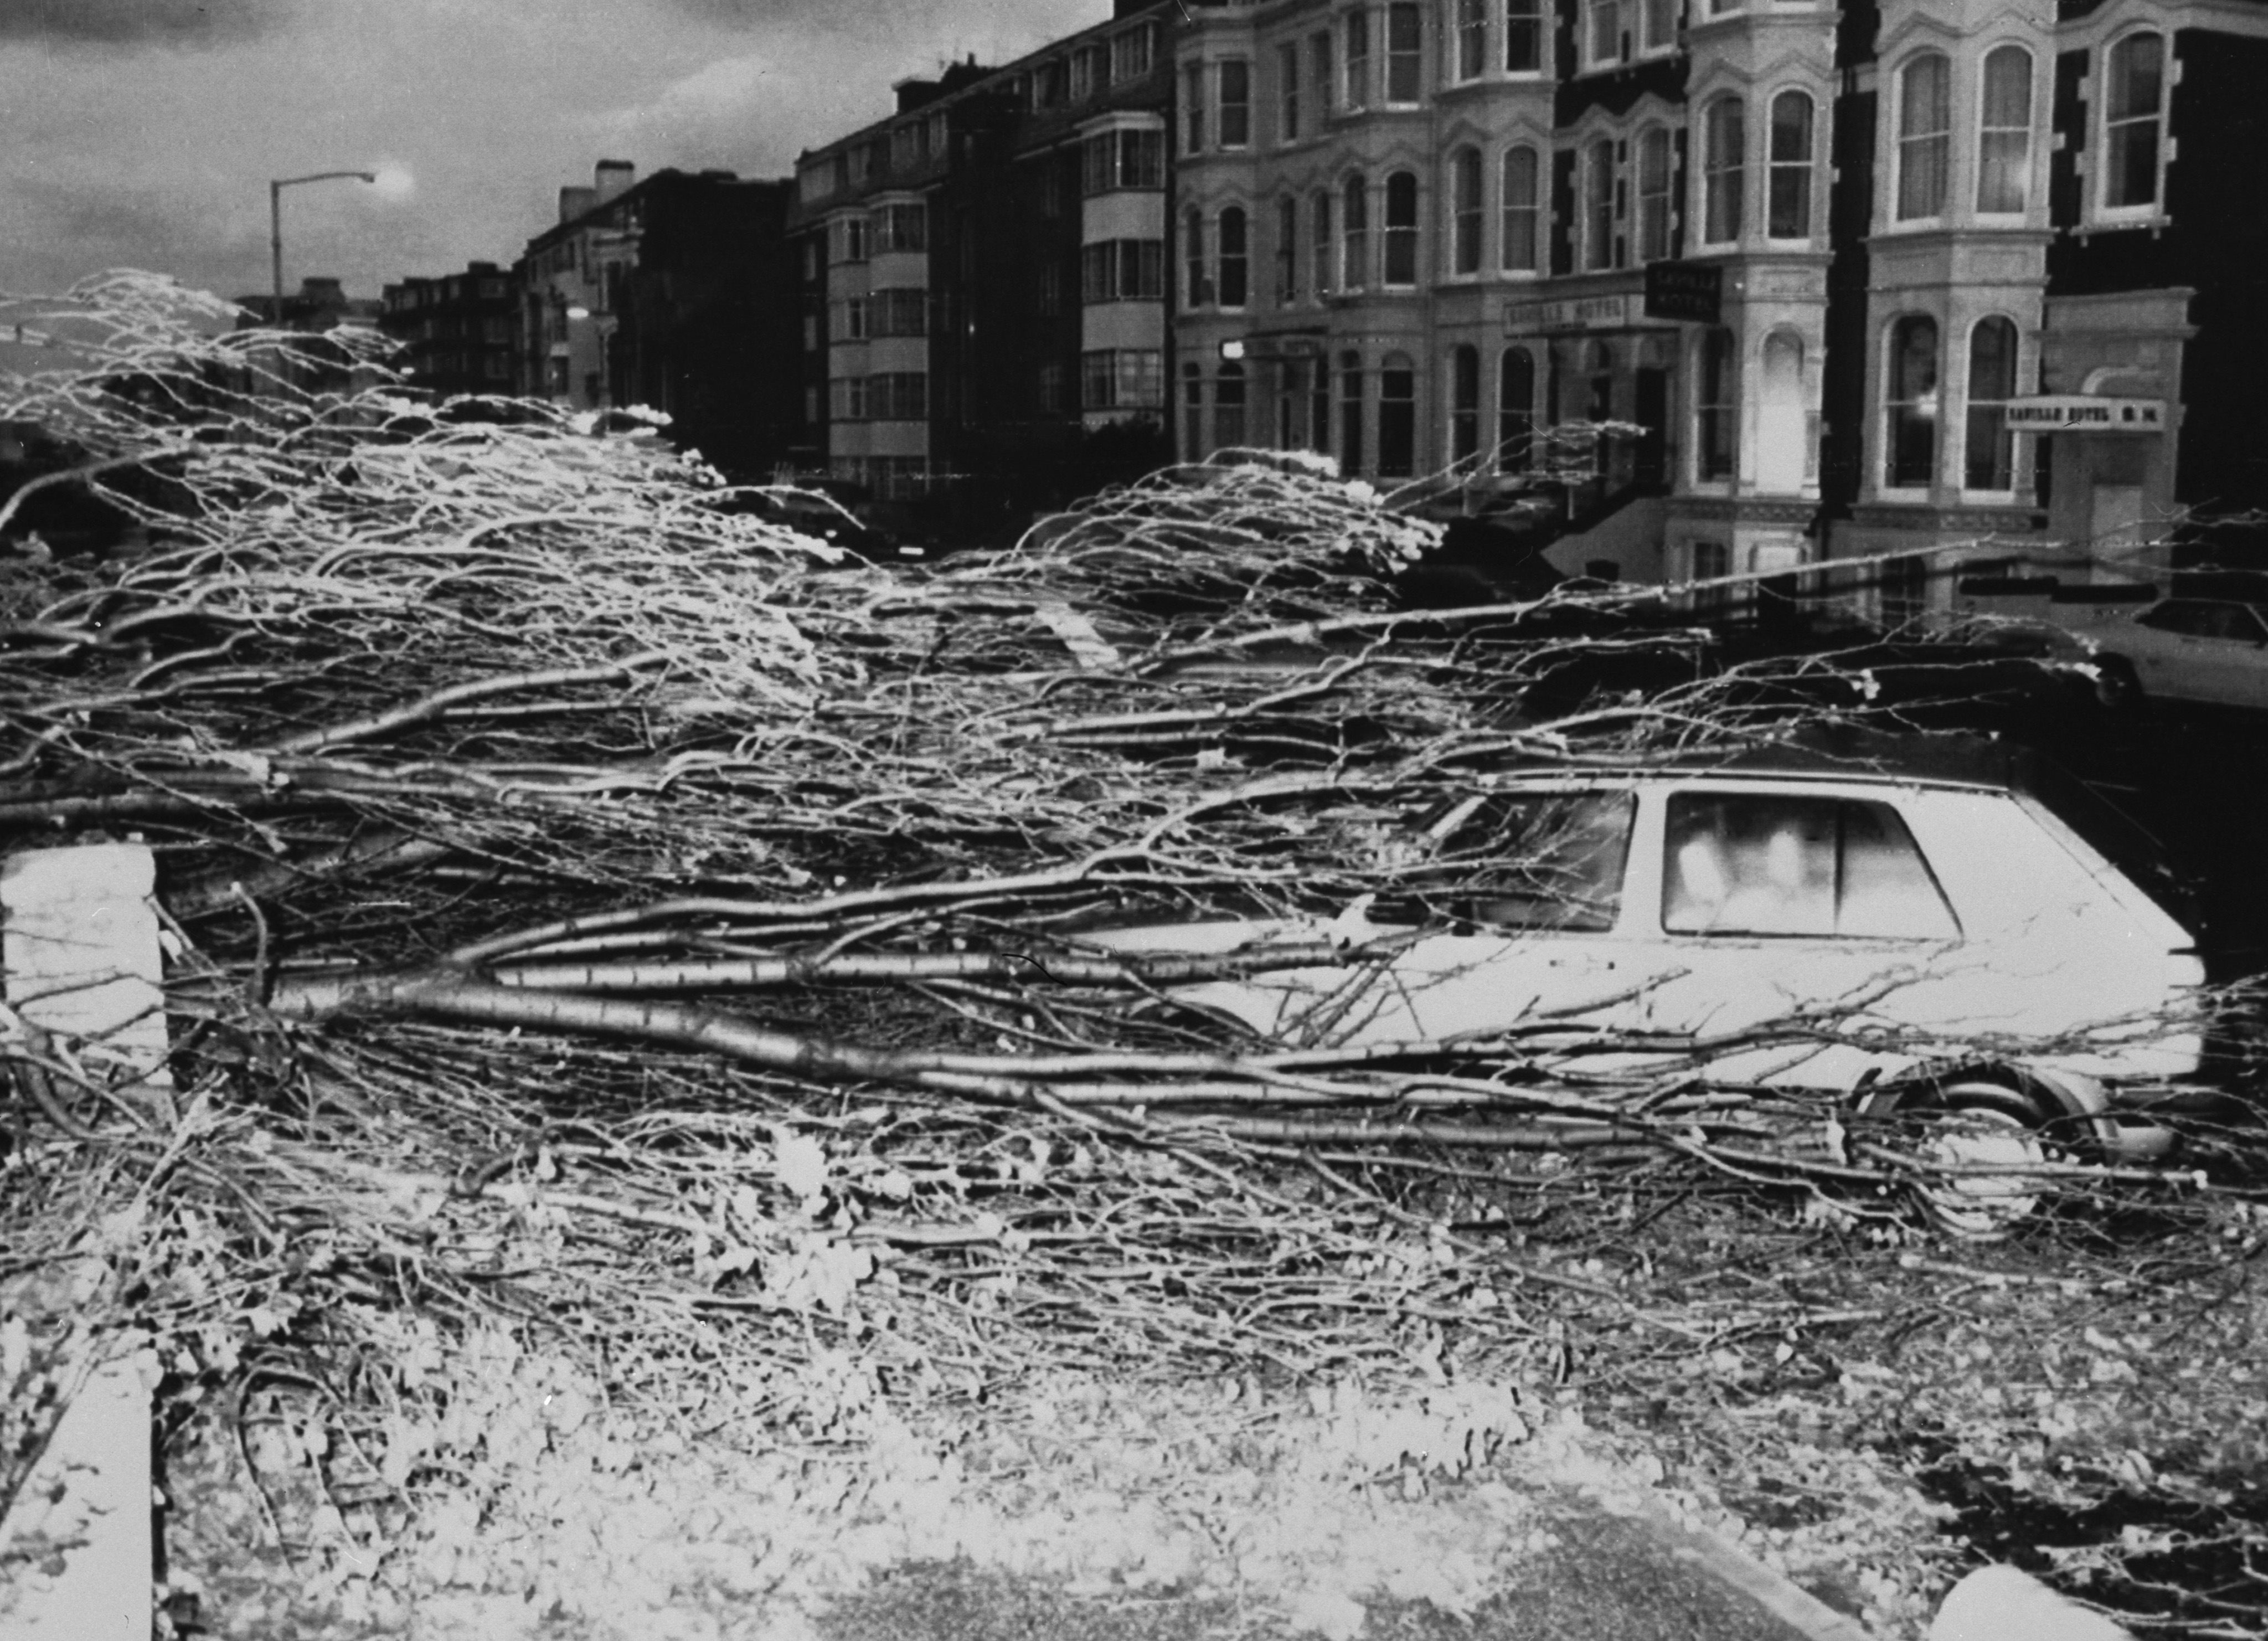 Fallen trees crashed onto cars in Portsmouth during the Great Storm of 1987.